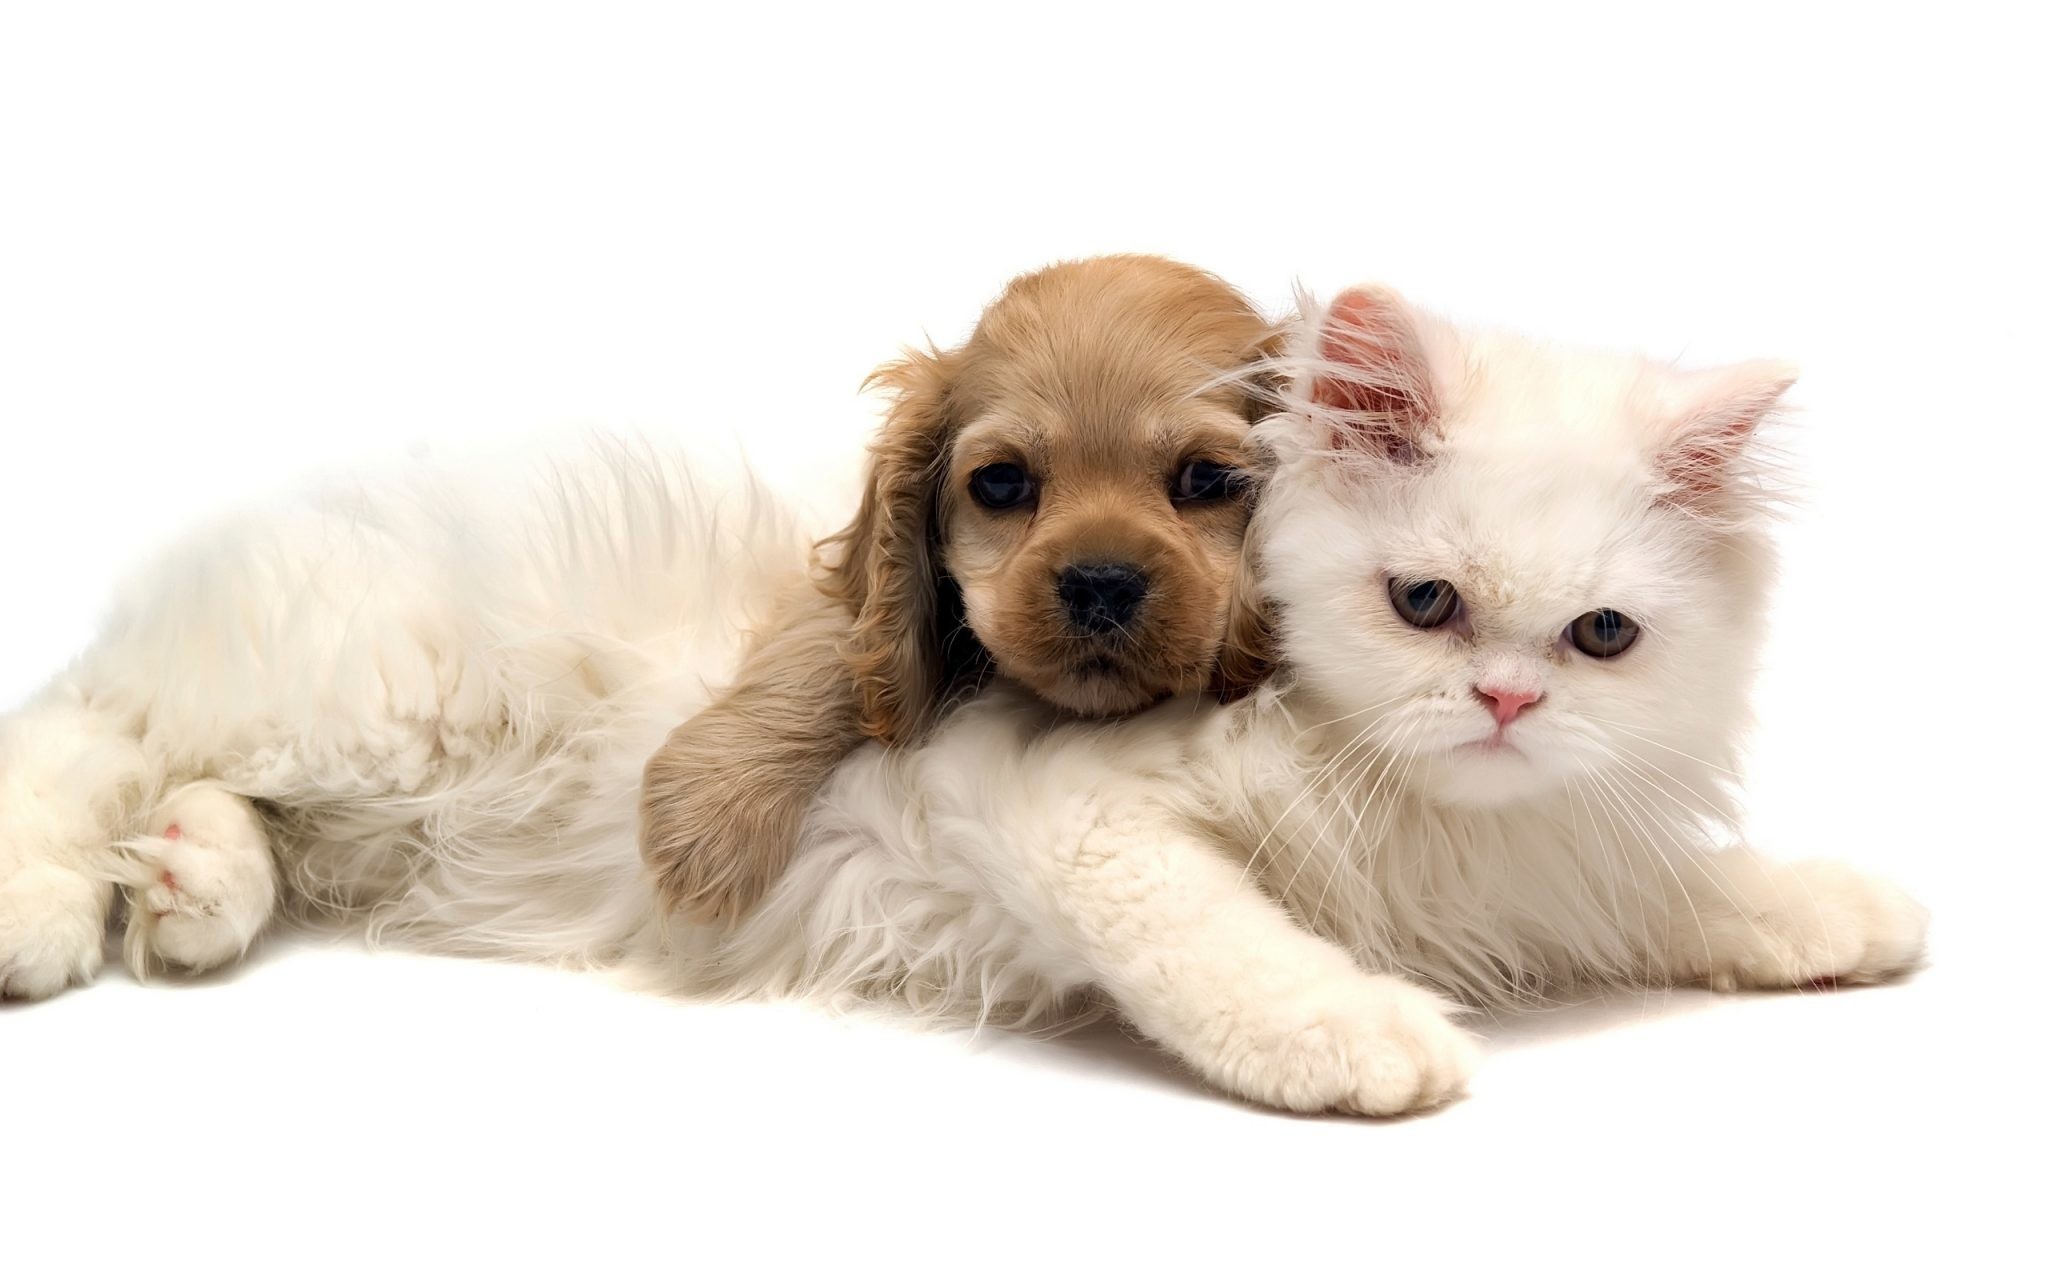 2048x1280 Cute Dog and Cat Wallpaper for Iphone, Mobile